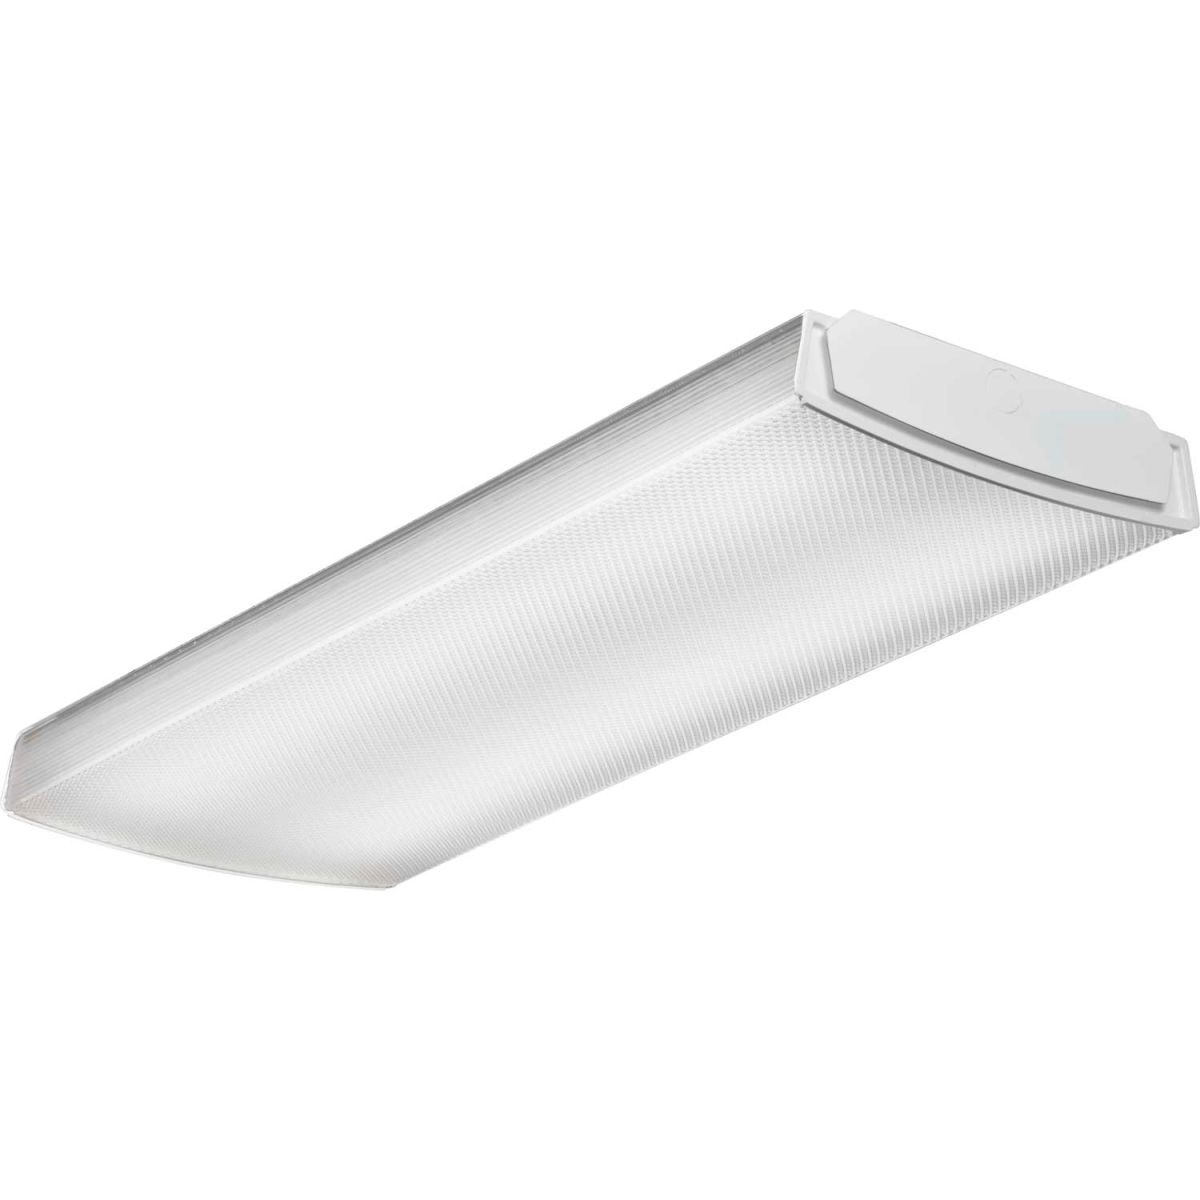 Picture of Acuity Brands B1477878 2000 Lumens Lithonia LBL2 LP840 2 ft. LED Wraparound Fixture